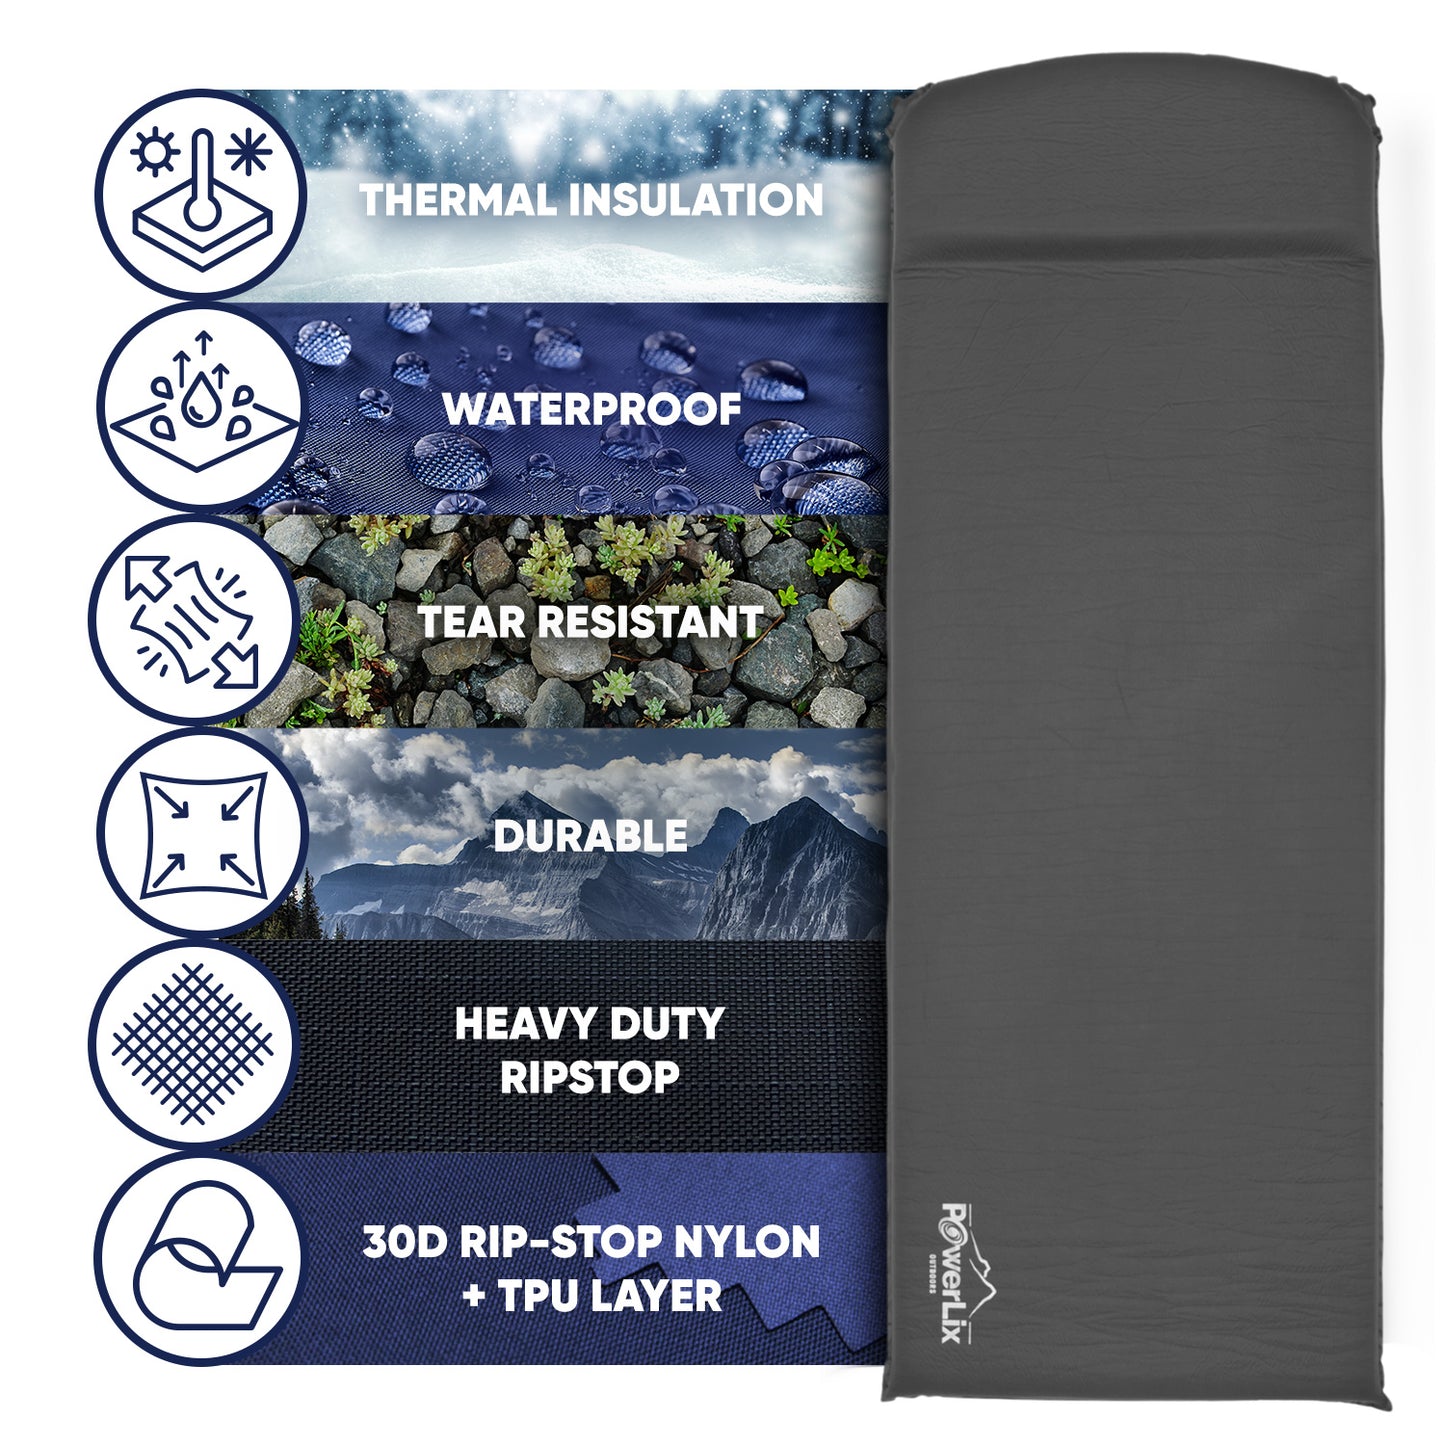 A gray powerlix sleeping pad is featured. Beside it are icons that correspond to the following text, "Thermal insulation, waterproof, tear resistant, durable, heavy duty ripstop, 30D ripstop nylon + TPU layer."